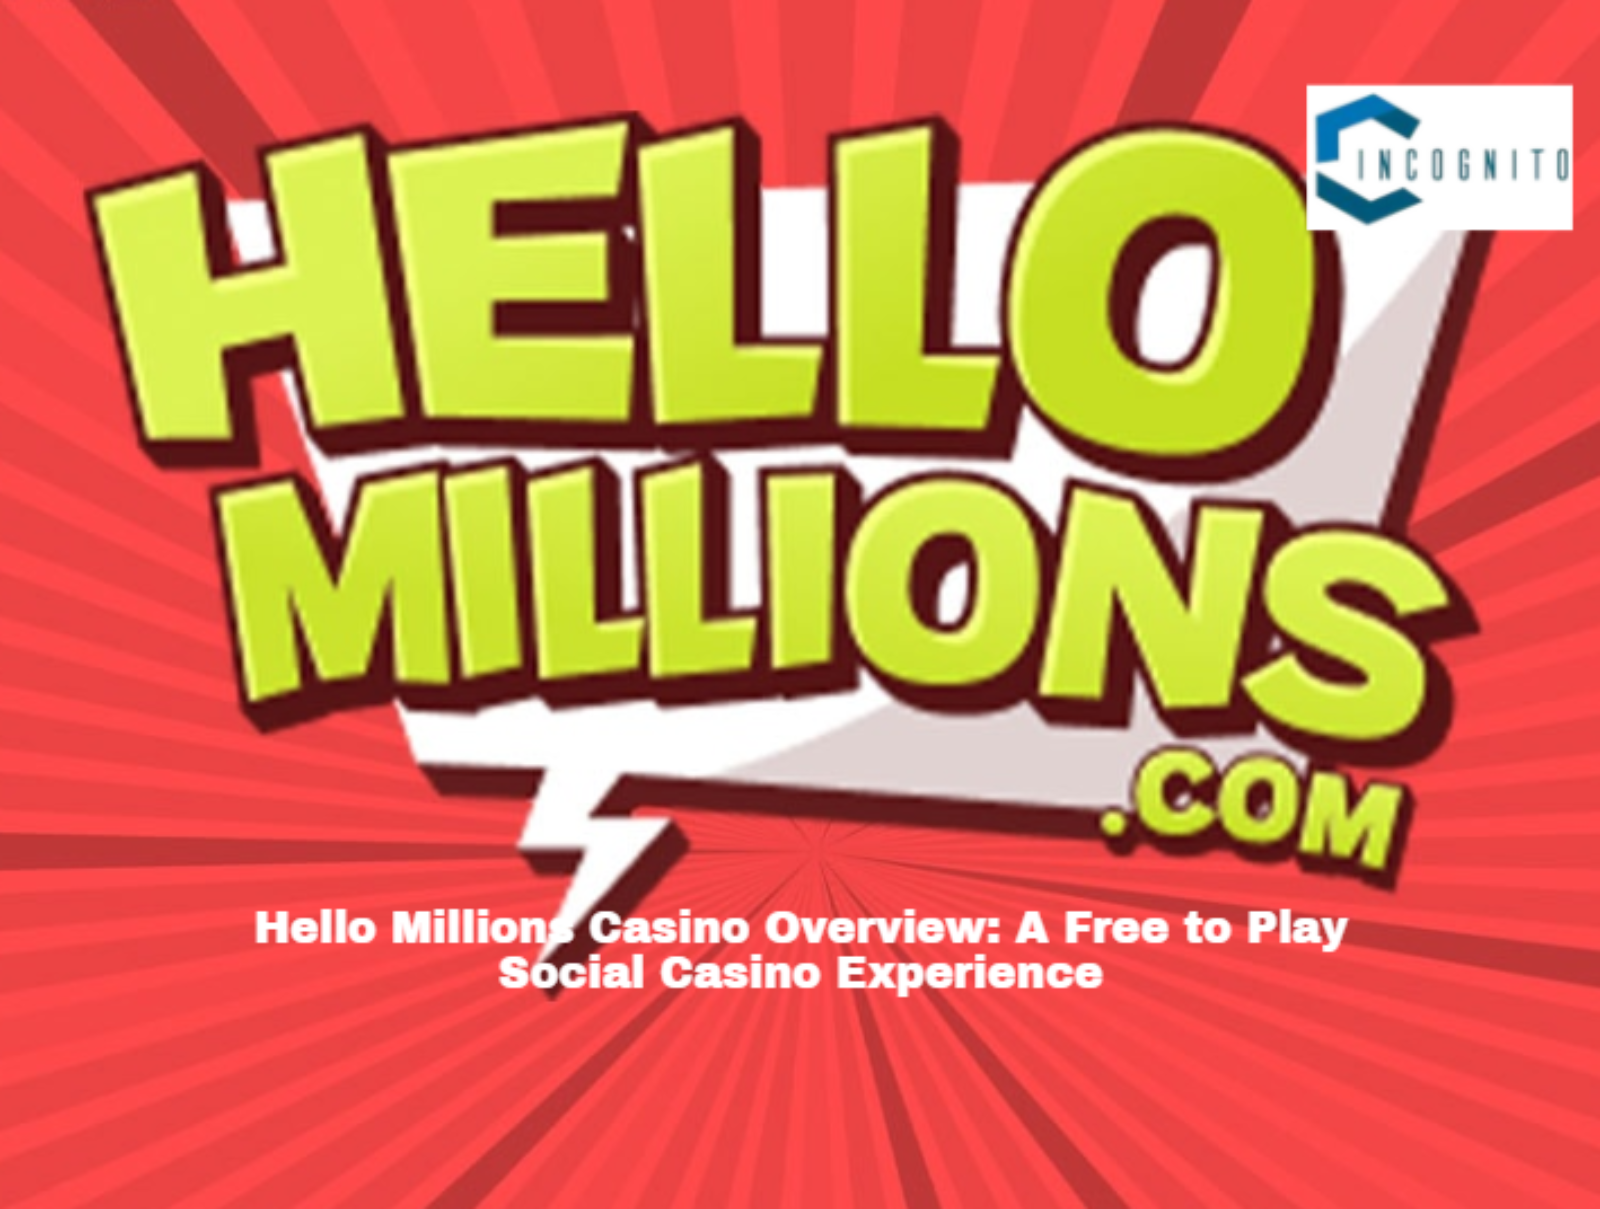 Hello Millions Casino Overview: A Free to Play Social Casino Experience